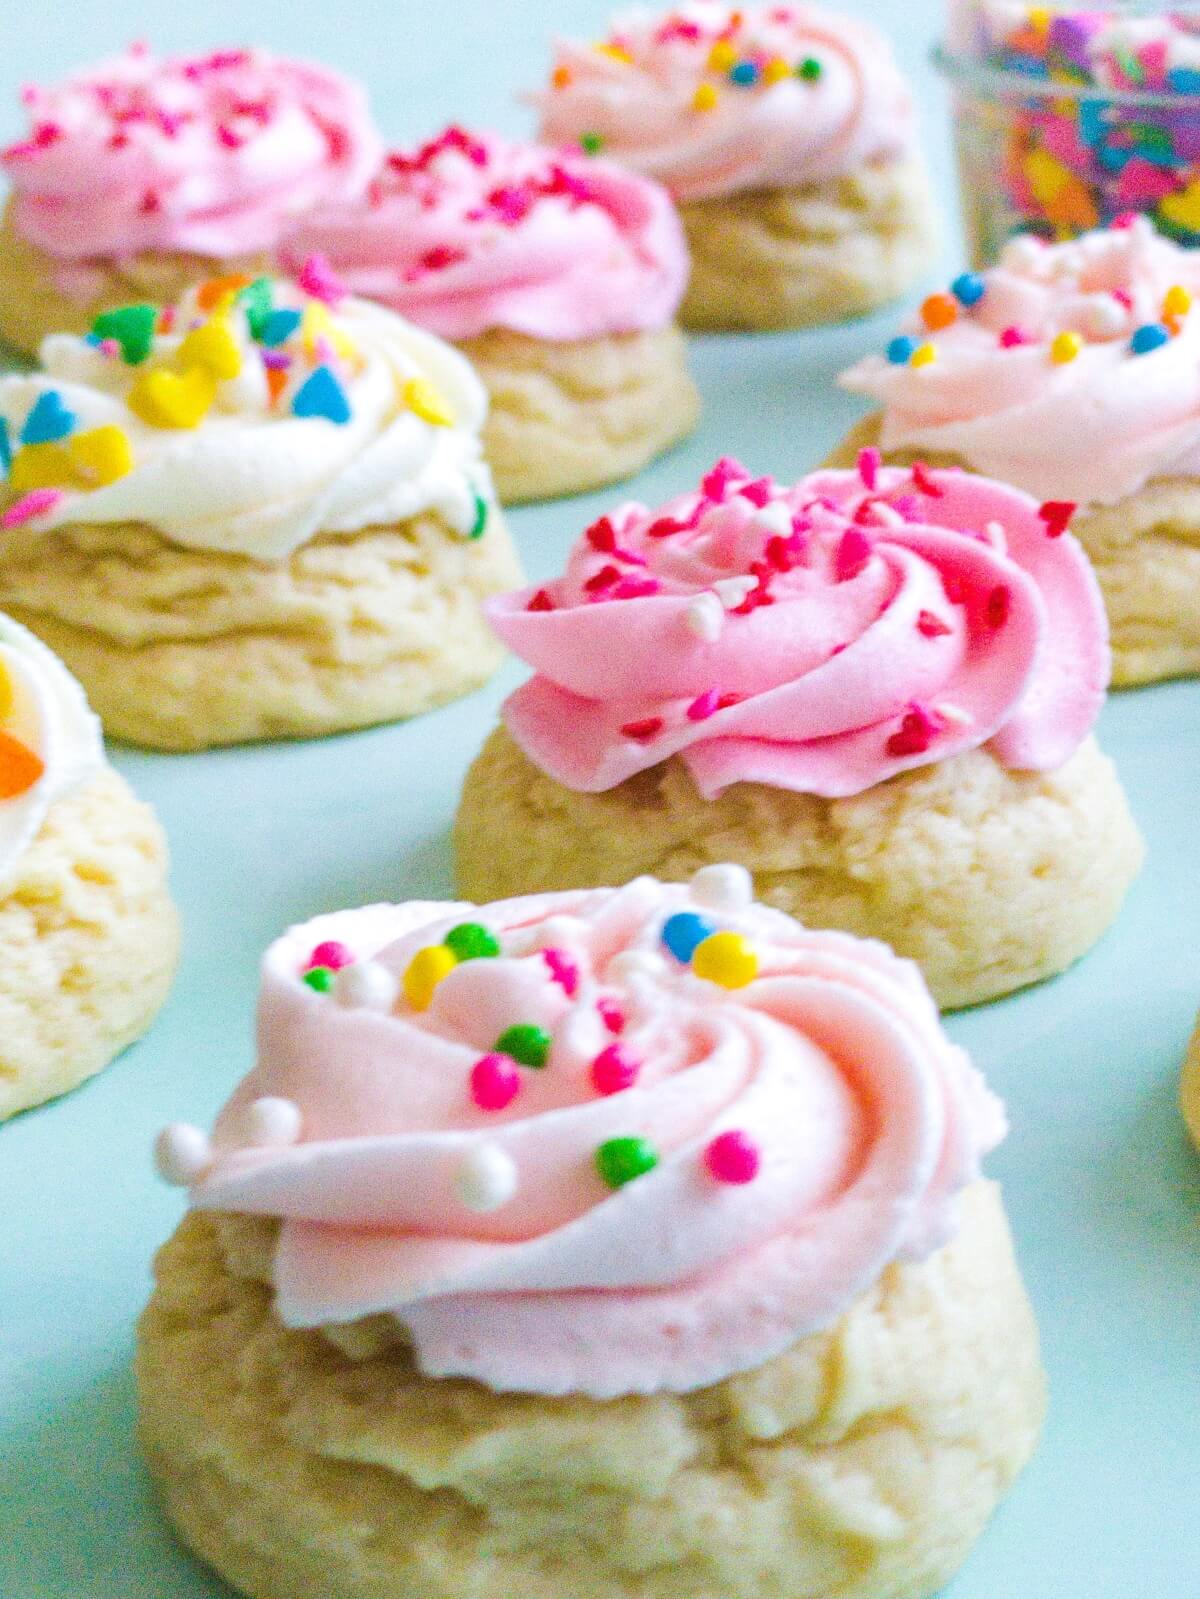 Mini sugar cookies frosted with a buttercream swirl